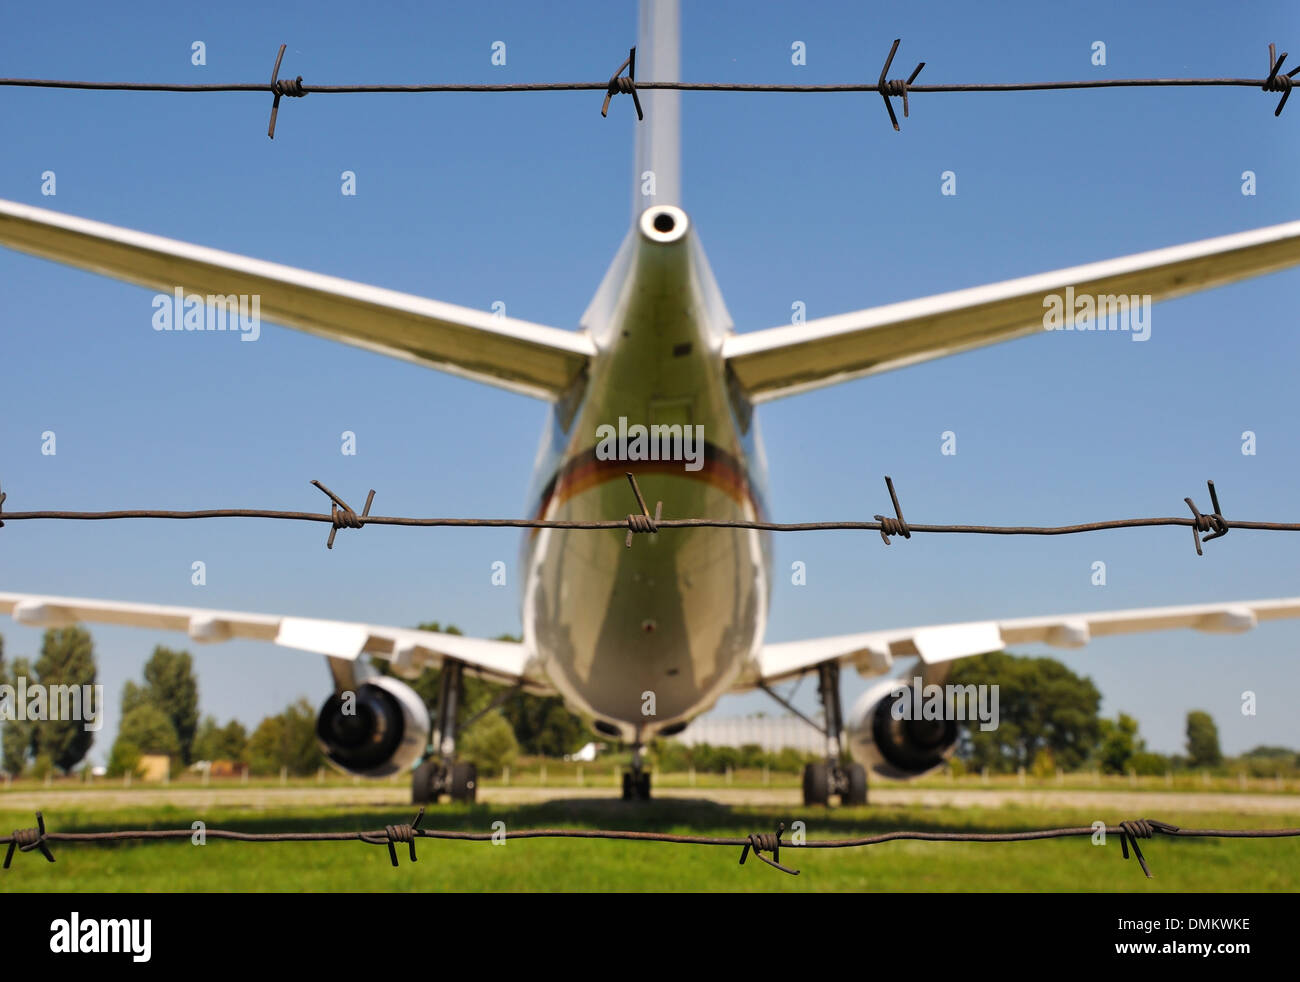 airplane behind three lines of barbwire Stock Photo